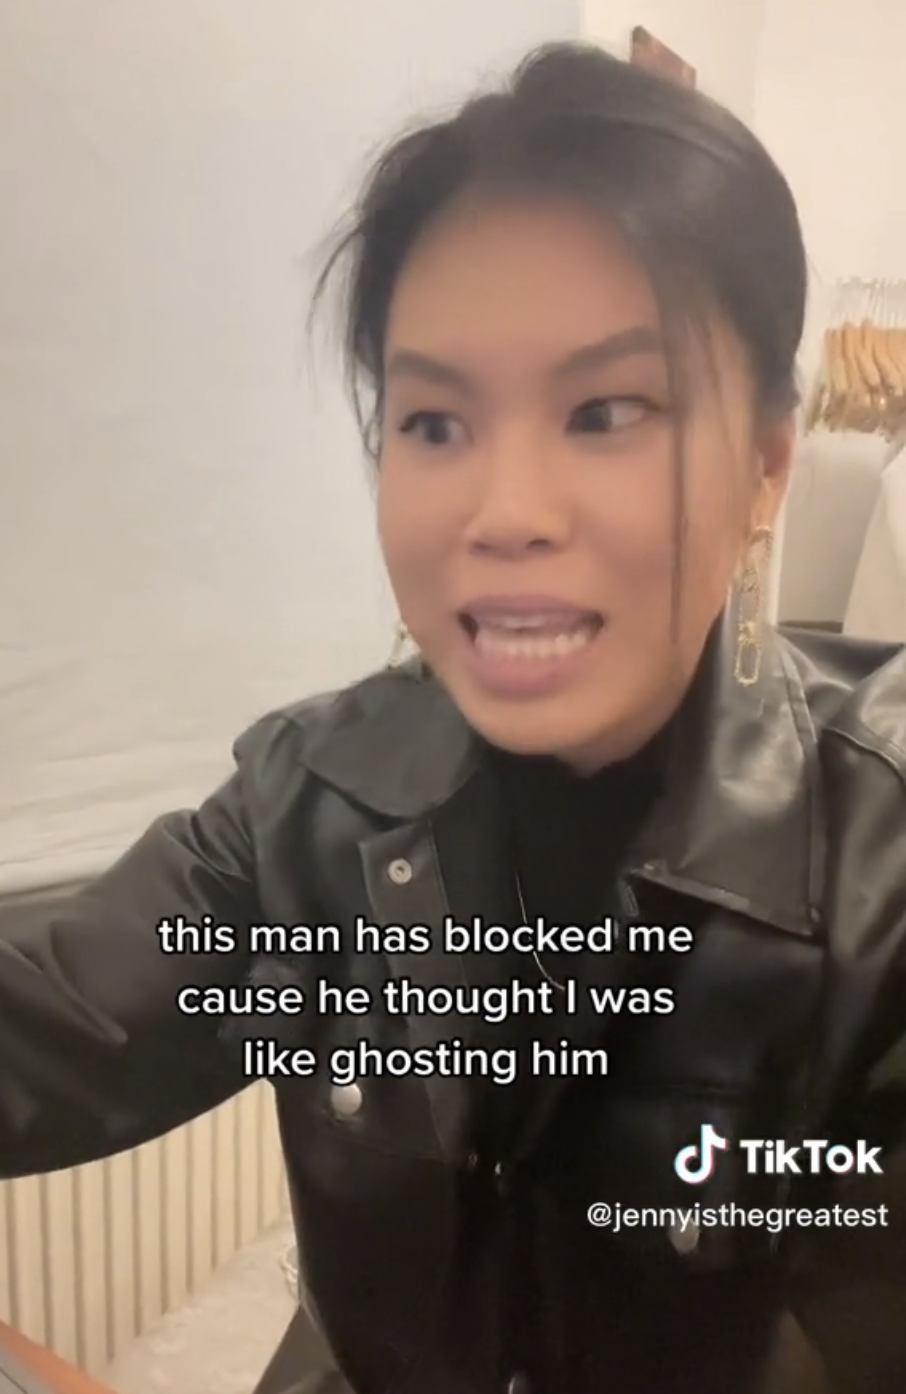 Jenny saying &quot;this man has blocked me cause he thought I was like ghosting him&quot;